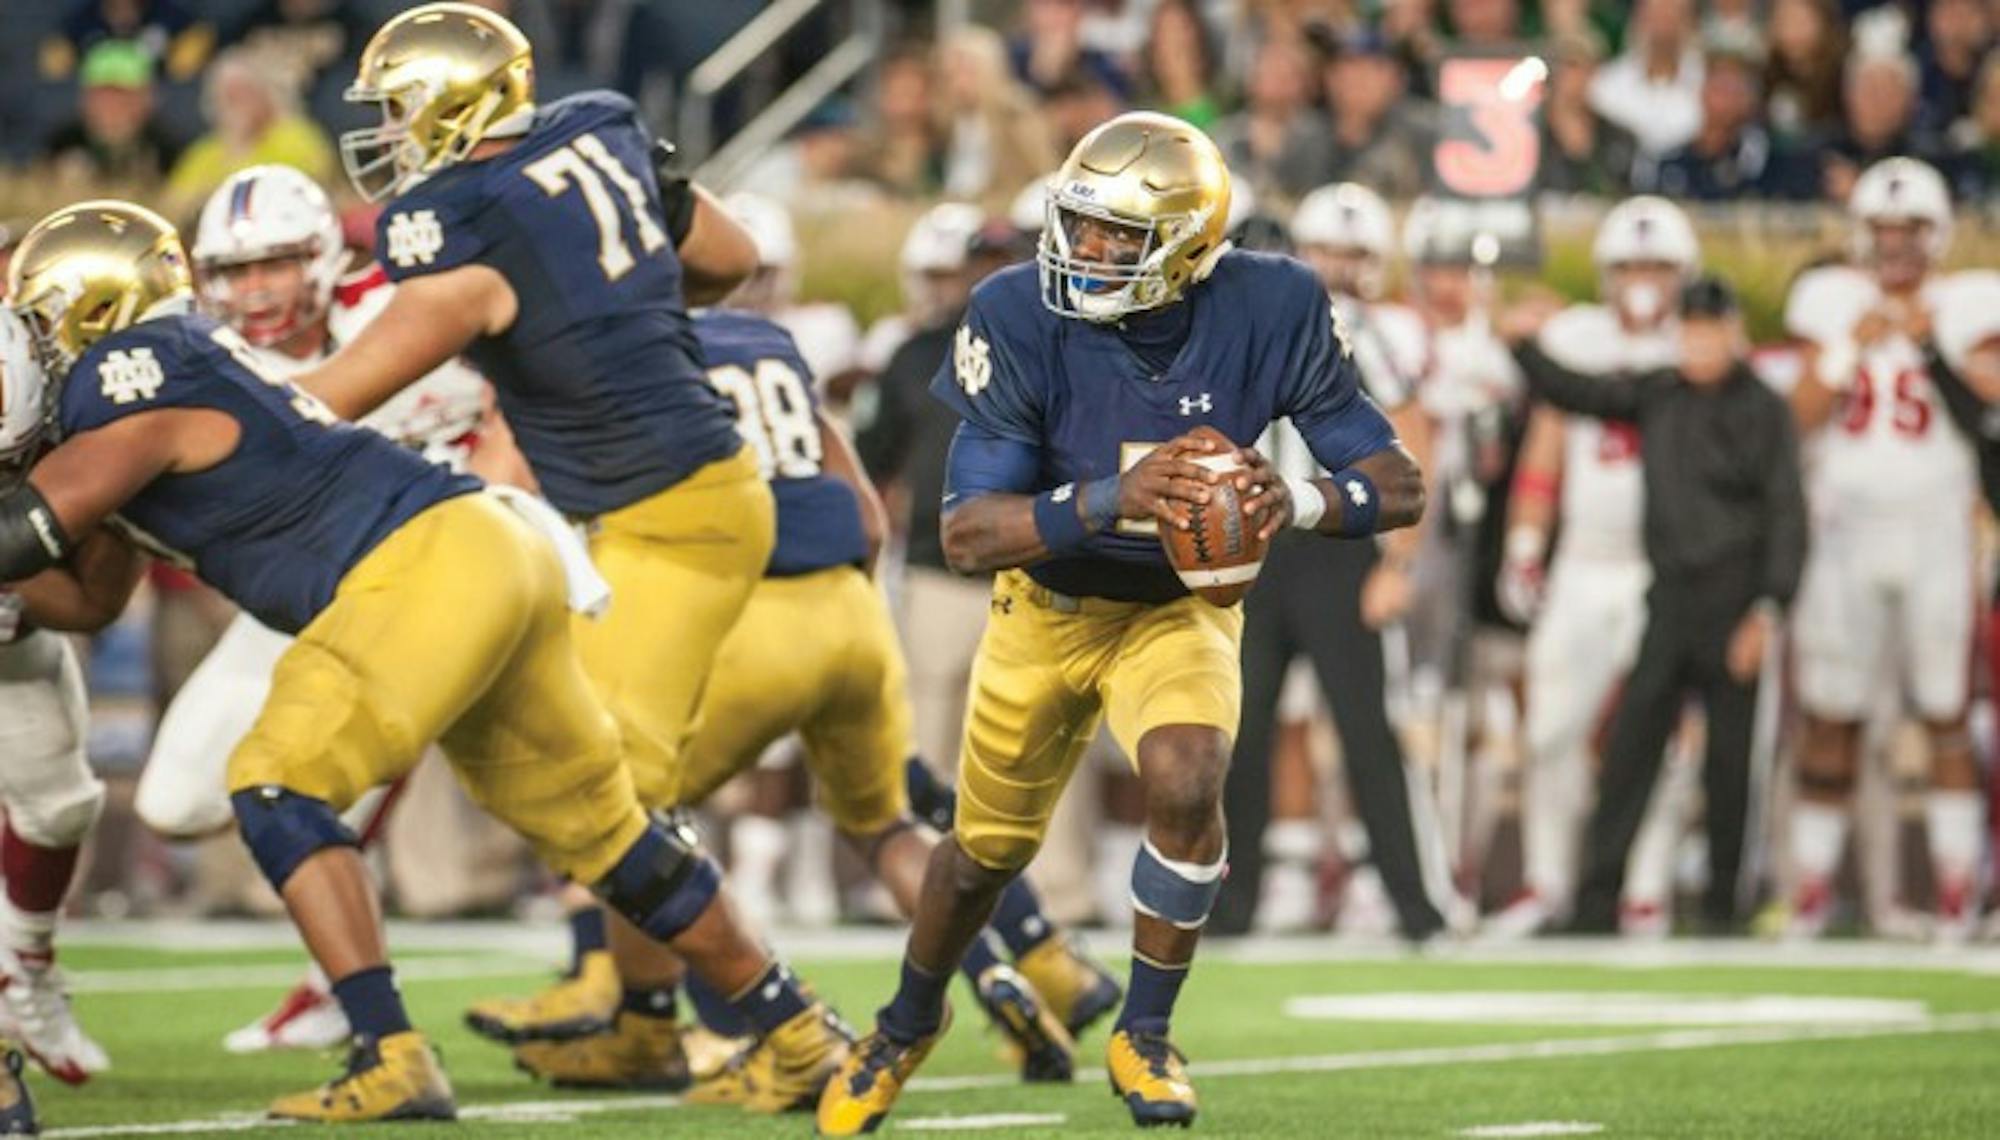 Irish junior quarterback Brandon Wimbush rolls out of the pocket during Notre Dame's 52-17 victory over Miami (OH) on Sept. 30 at Notre Dame Stadium.